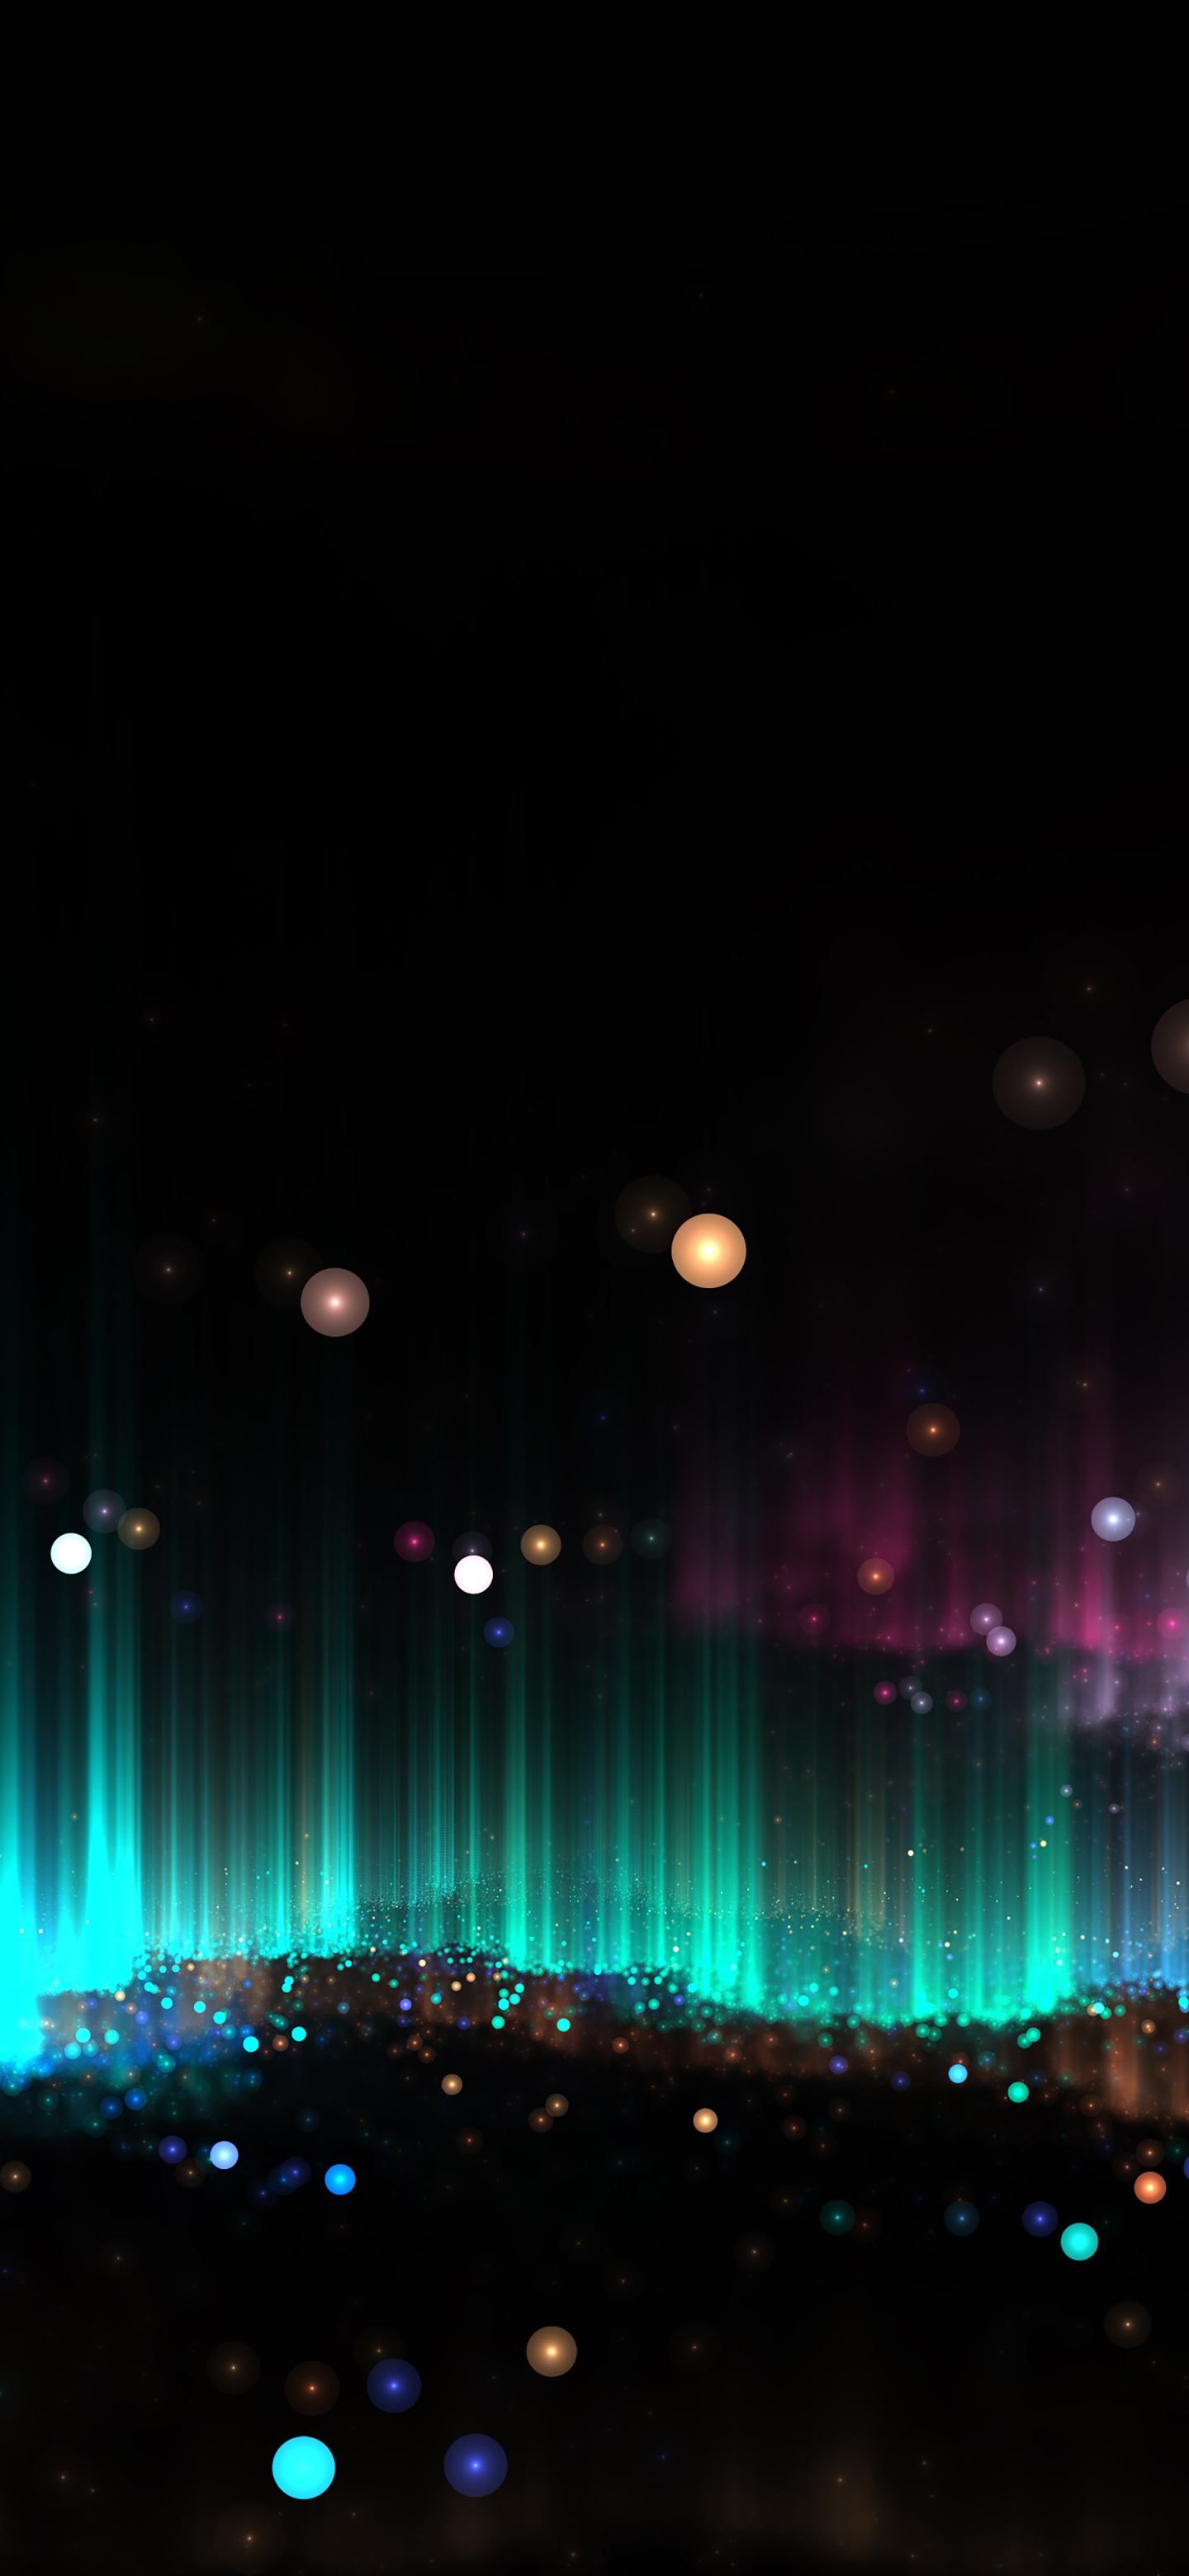 OLED-space-wallpaper-iphone-idownloadblog-abstract